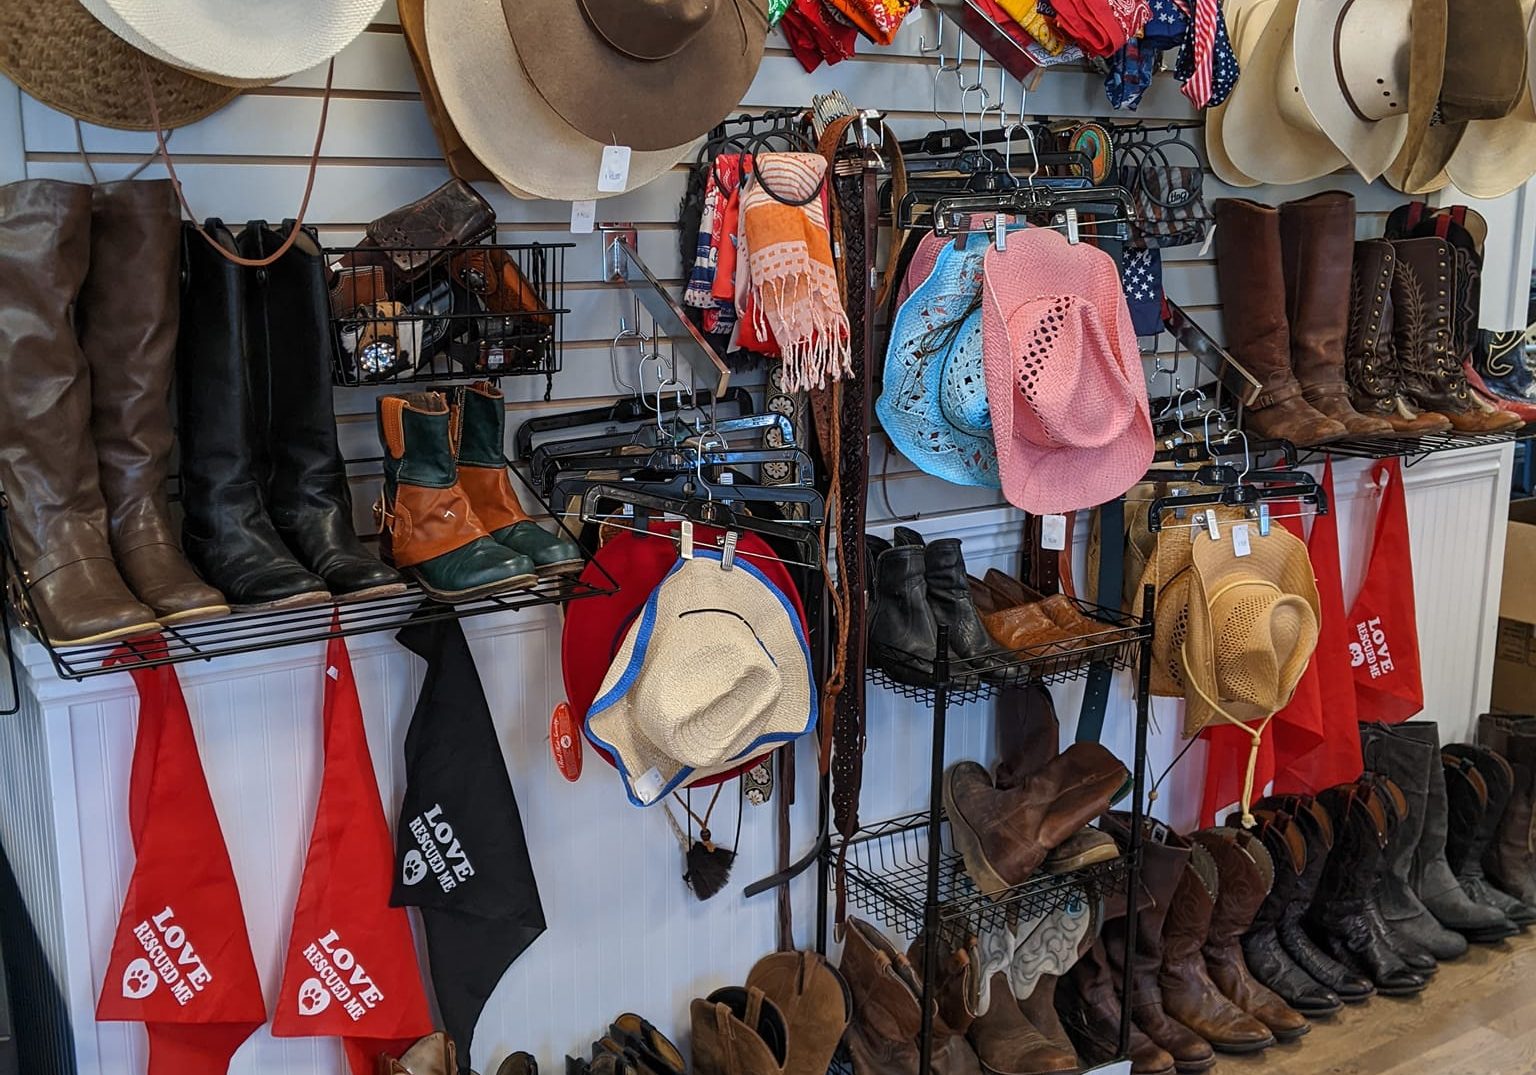 An assortment of hats, shoes, scarves, and other accessories hanging on the wall at the Barkin' Thrift store